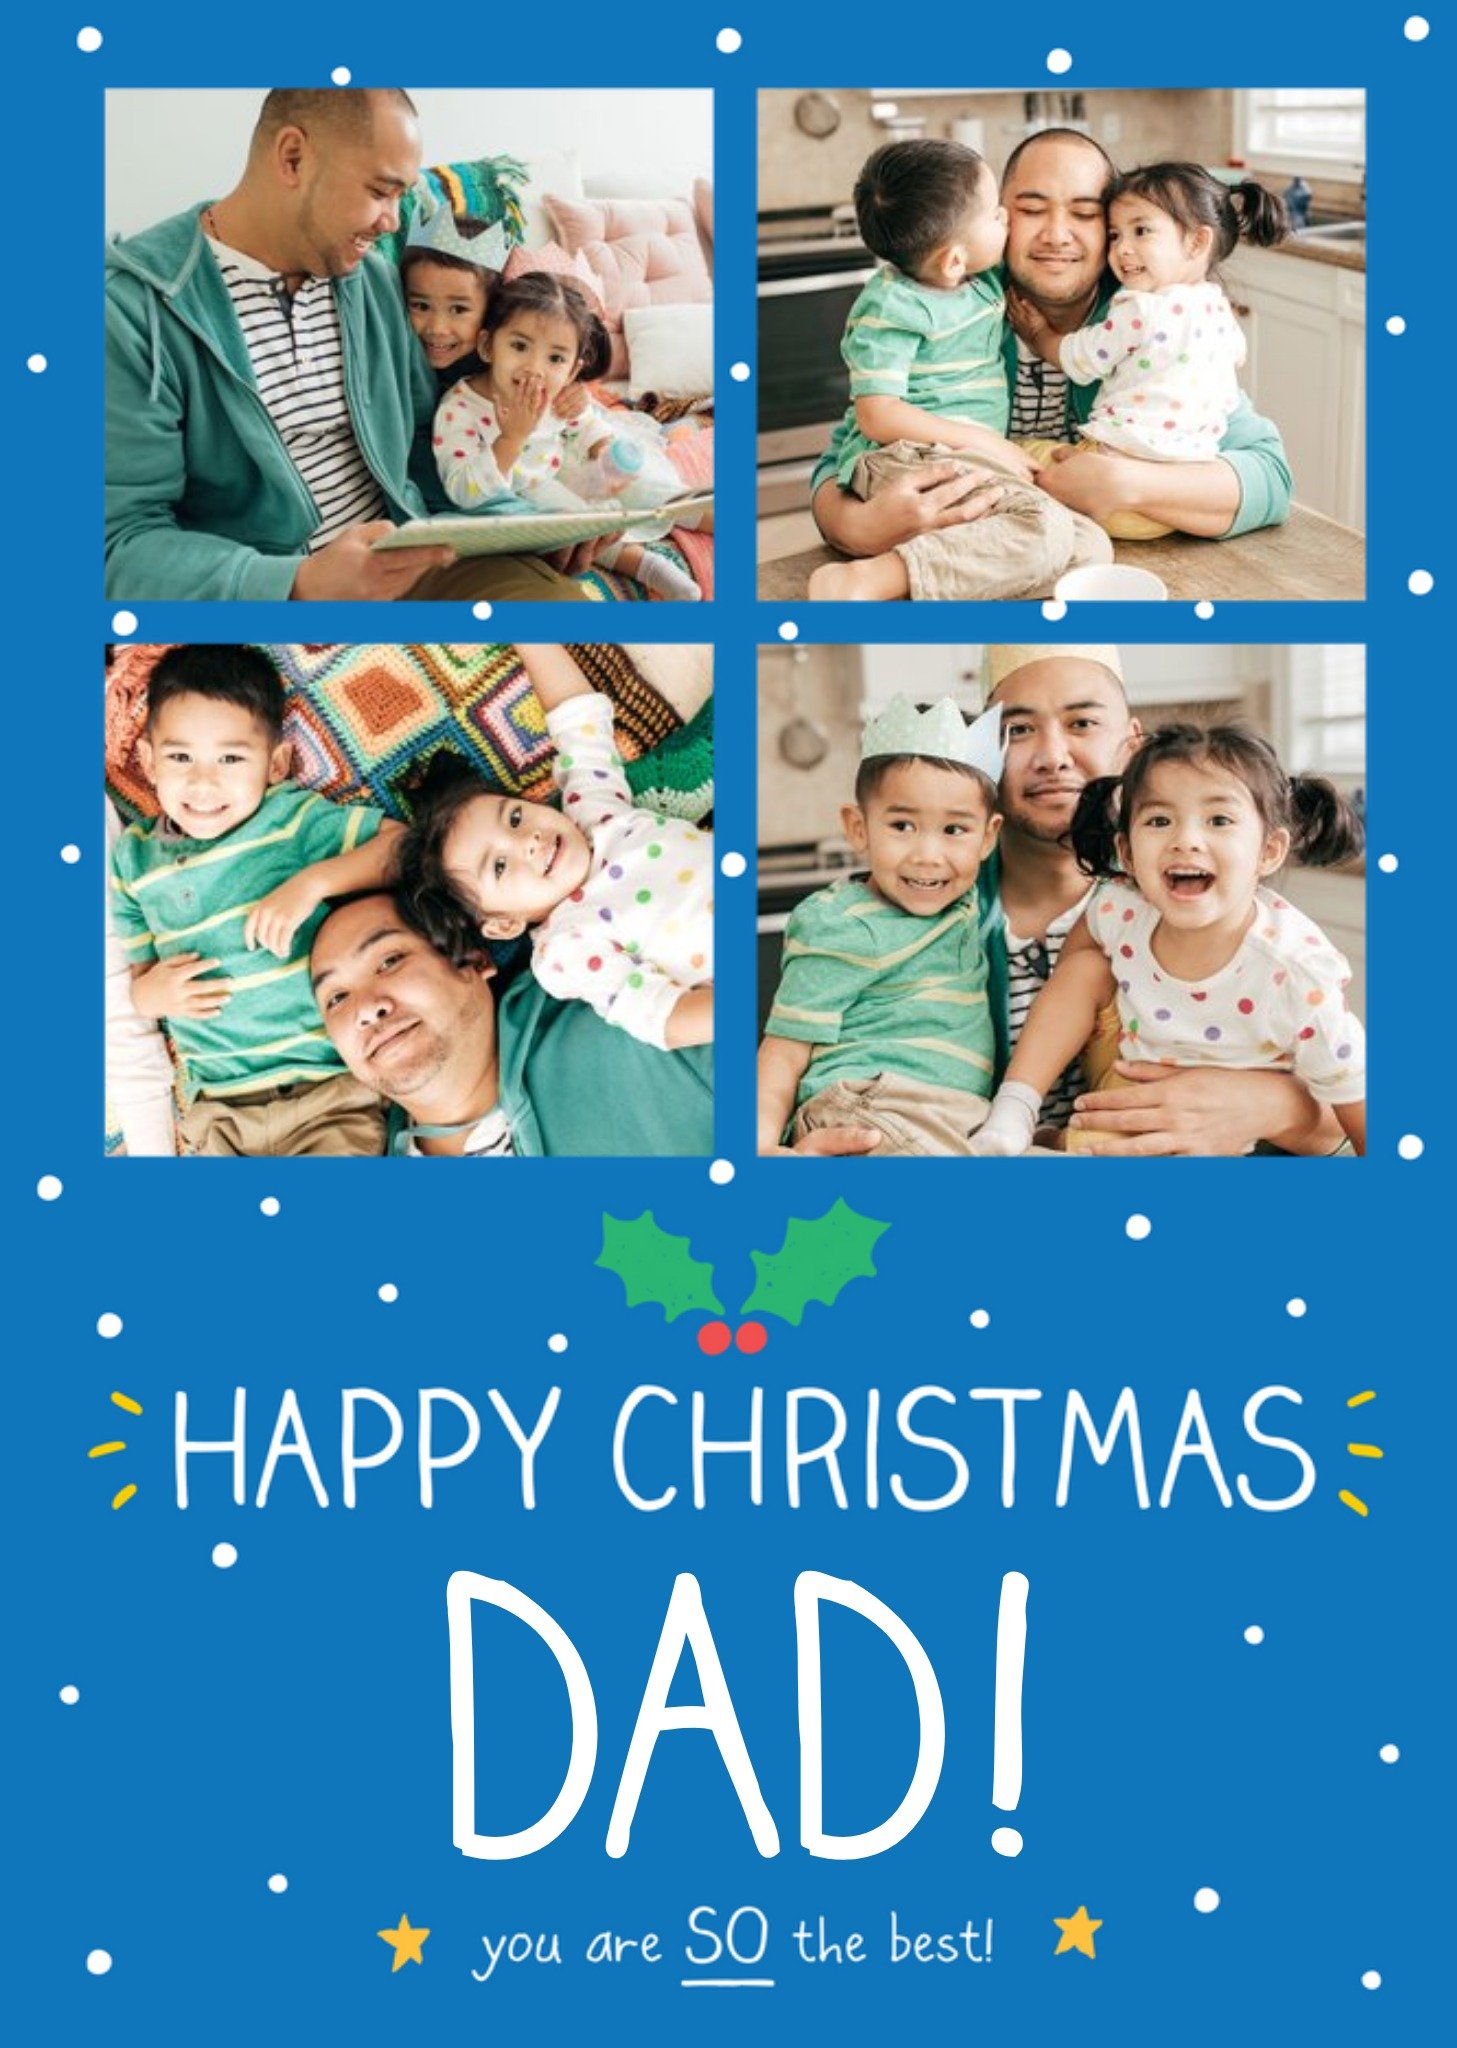 Happy Jackson Photo Upload Christmas Card For Dad, You Are So The Best Ecard